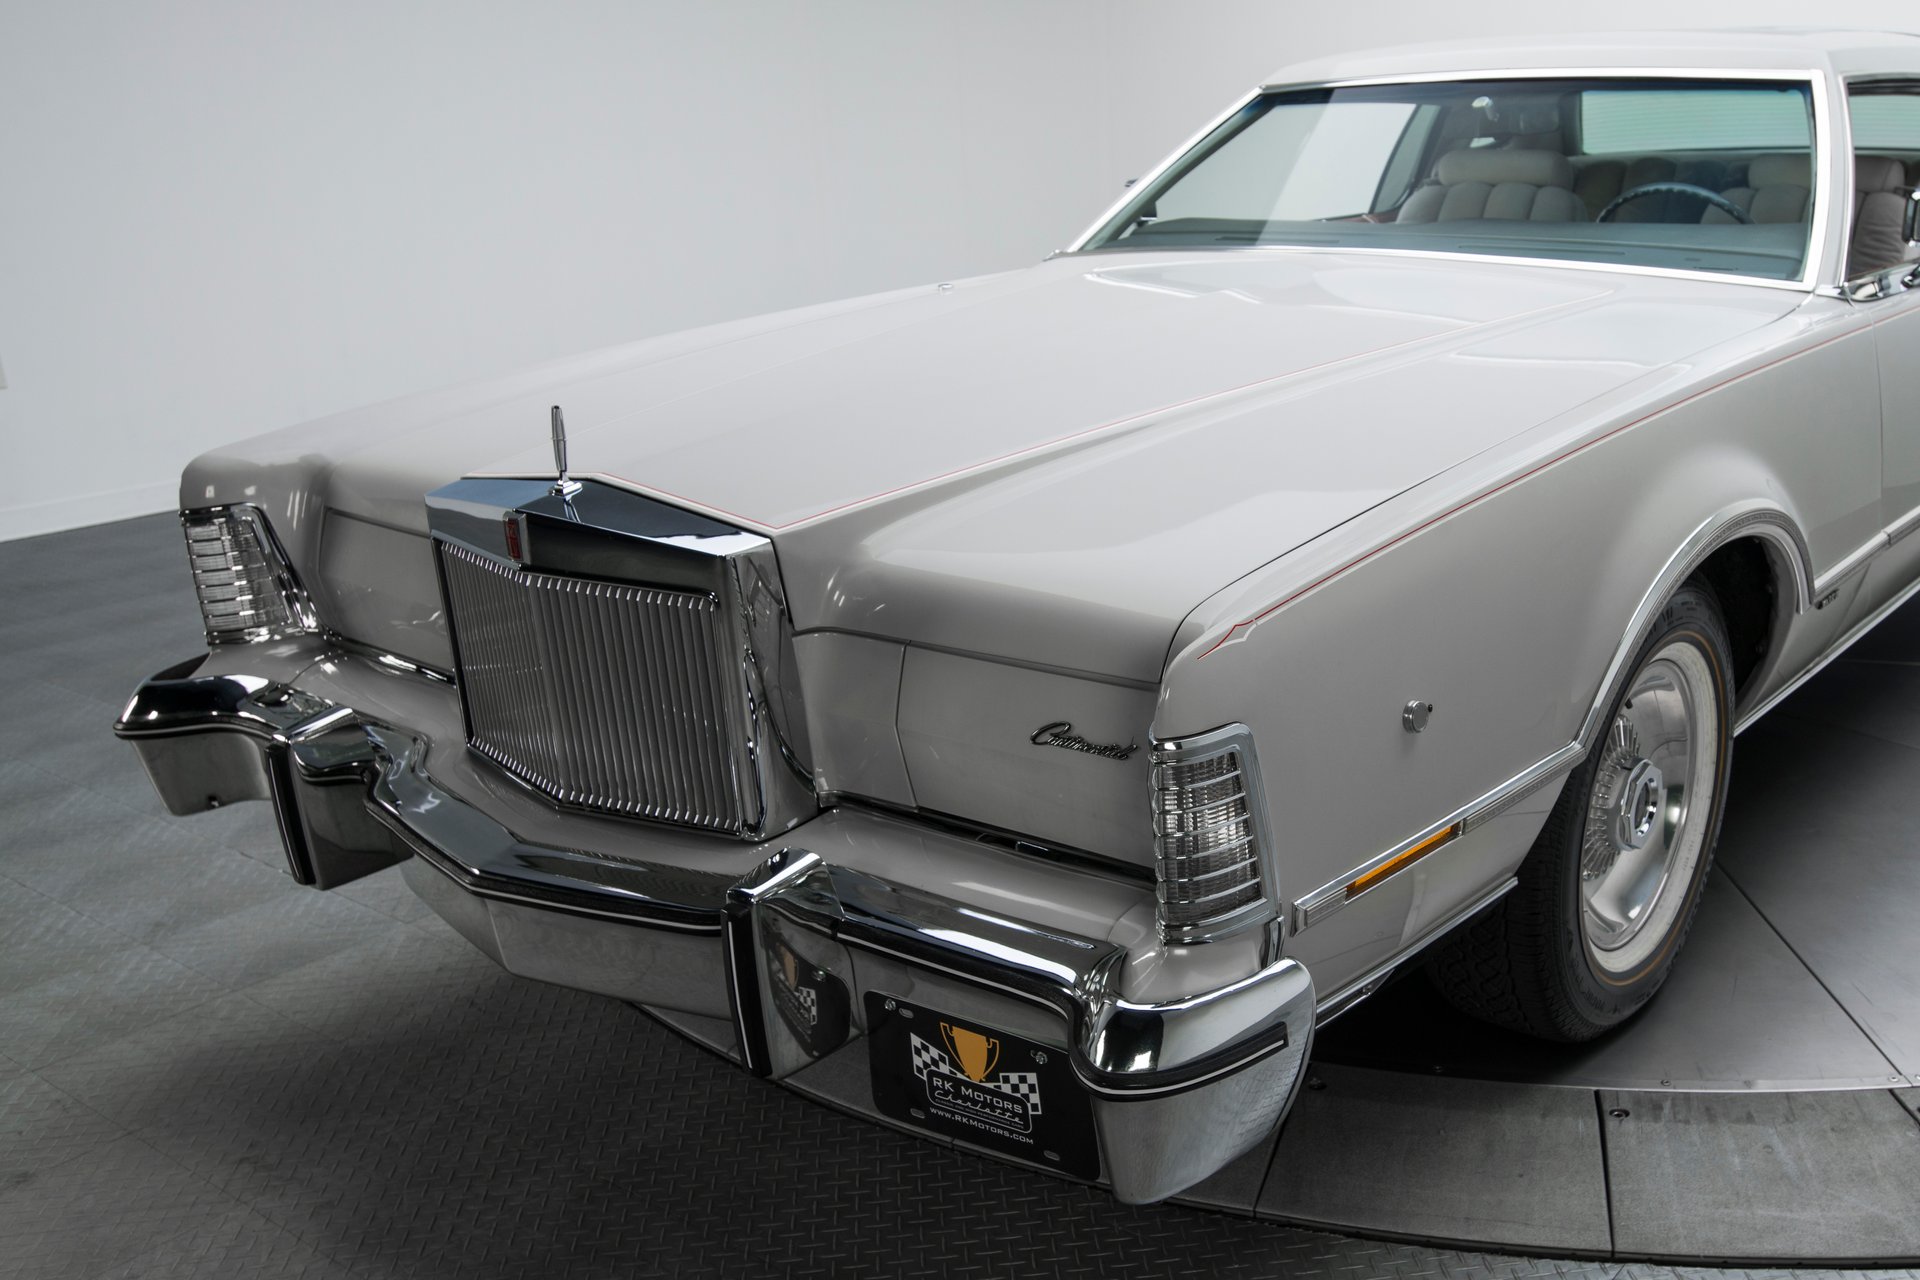 1976 lincoln continental mark iv cartier edition